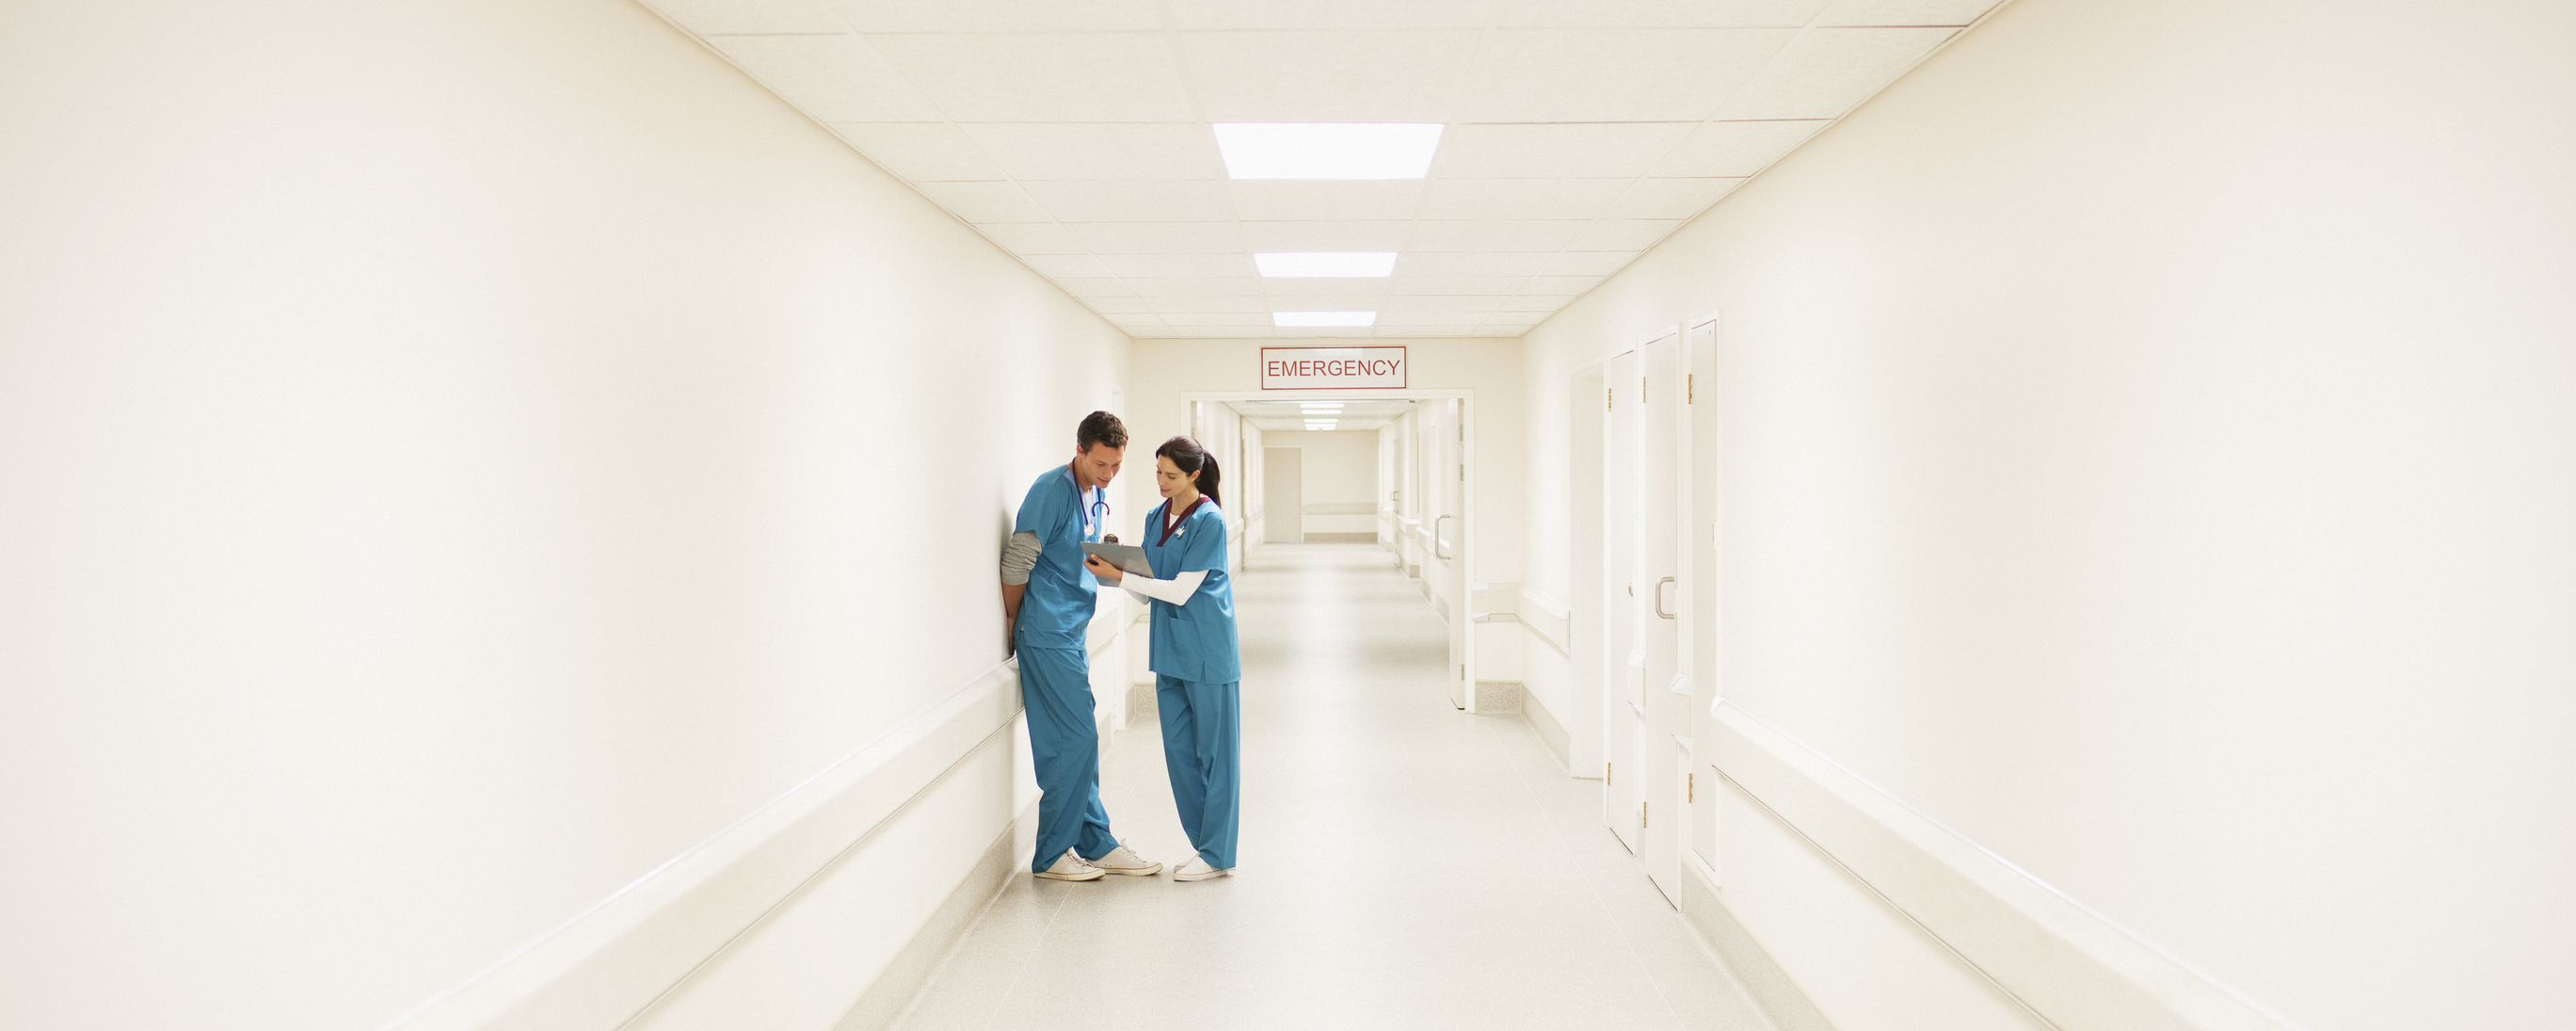 Two medical professionals in blue scrubs stand in a hospital hallway, engaged in conversation near an &quot;Emergency&quot; sign at the hallway&#x27;s end